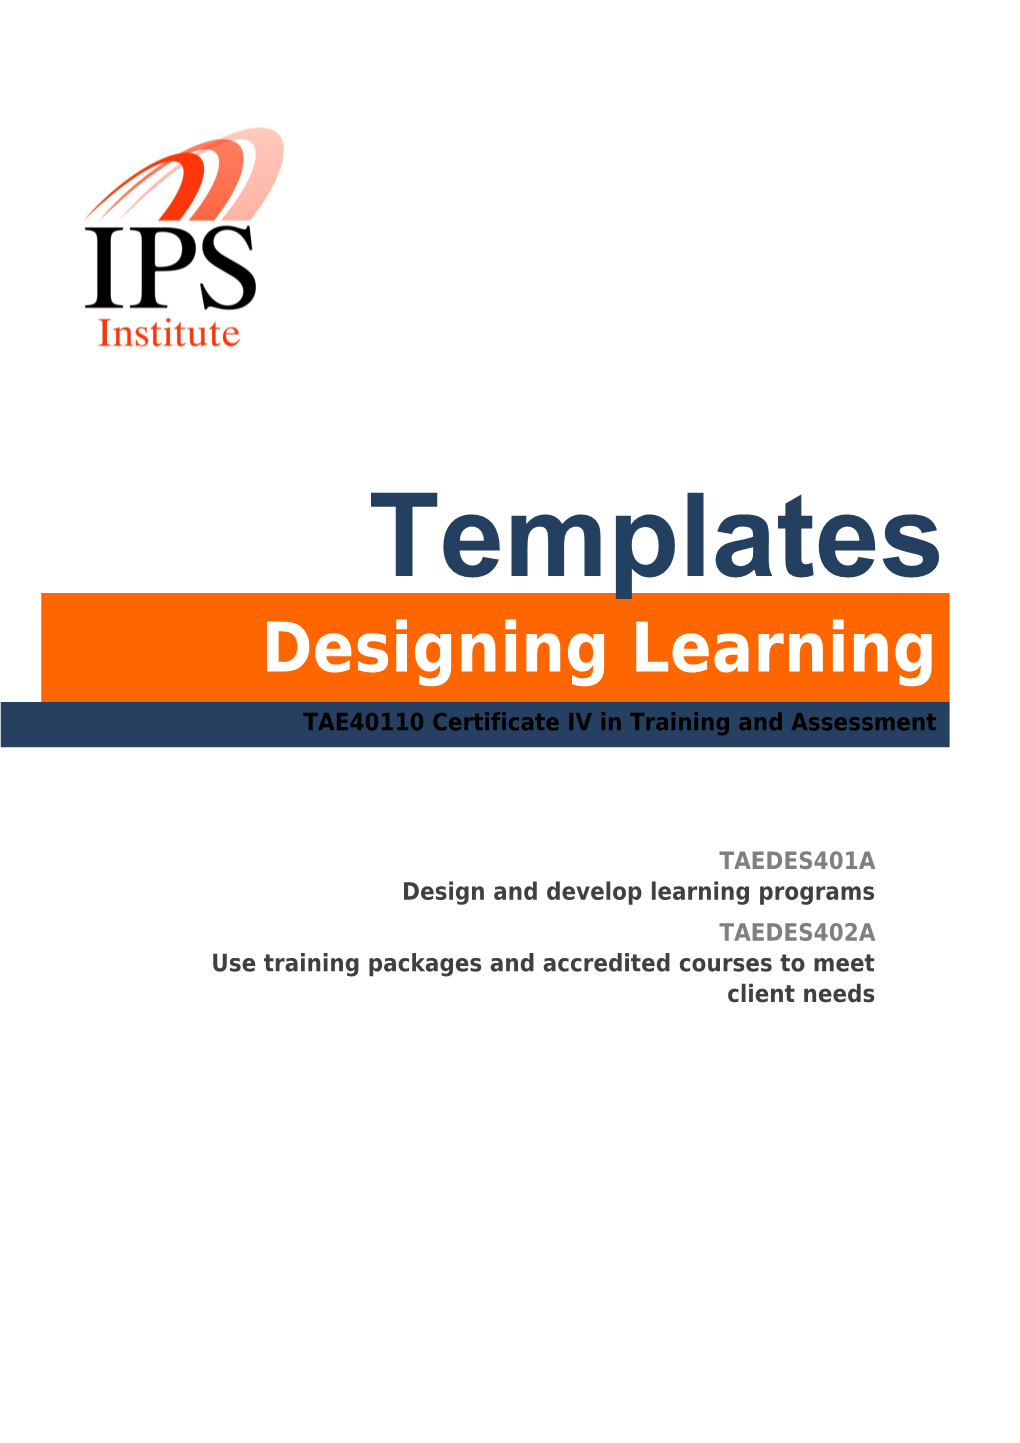 Designing Learning Templates